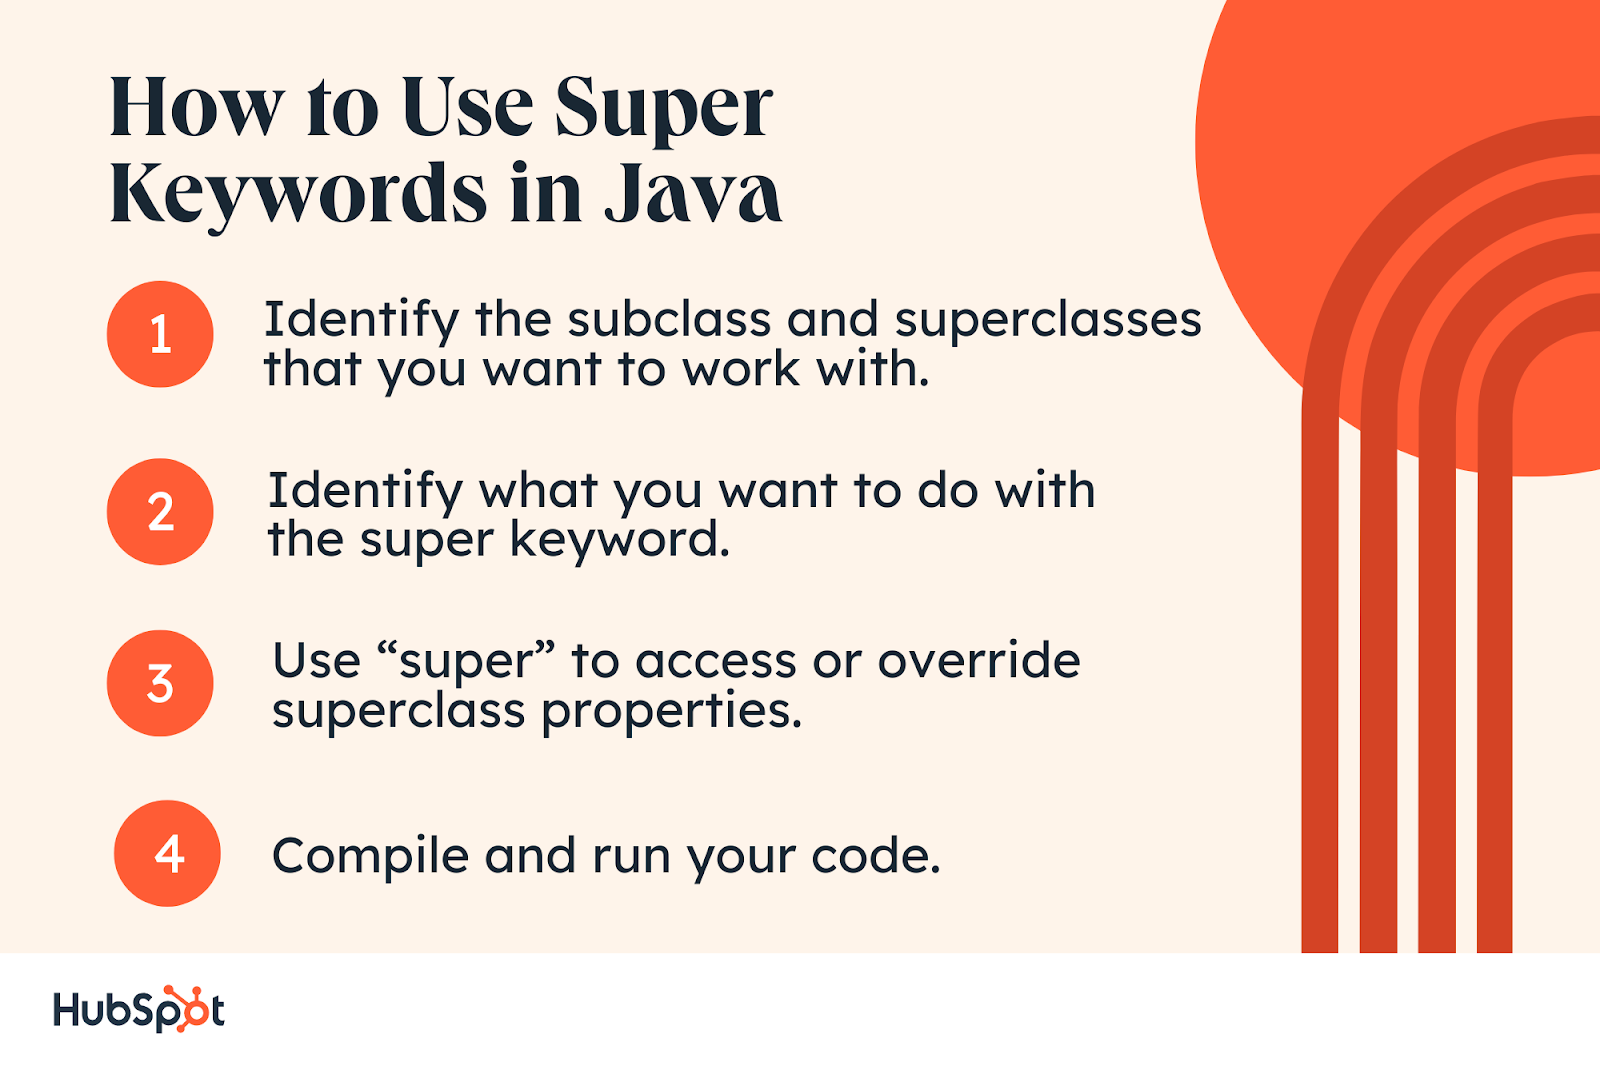 How to Use Super Keywords in Java. Identify the subclass and superclasses that you want to work with. Identify what you want to do with the super keyword. Use “super” to access or override superclass properties. Compile and run your code.